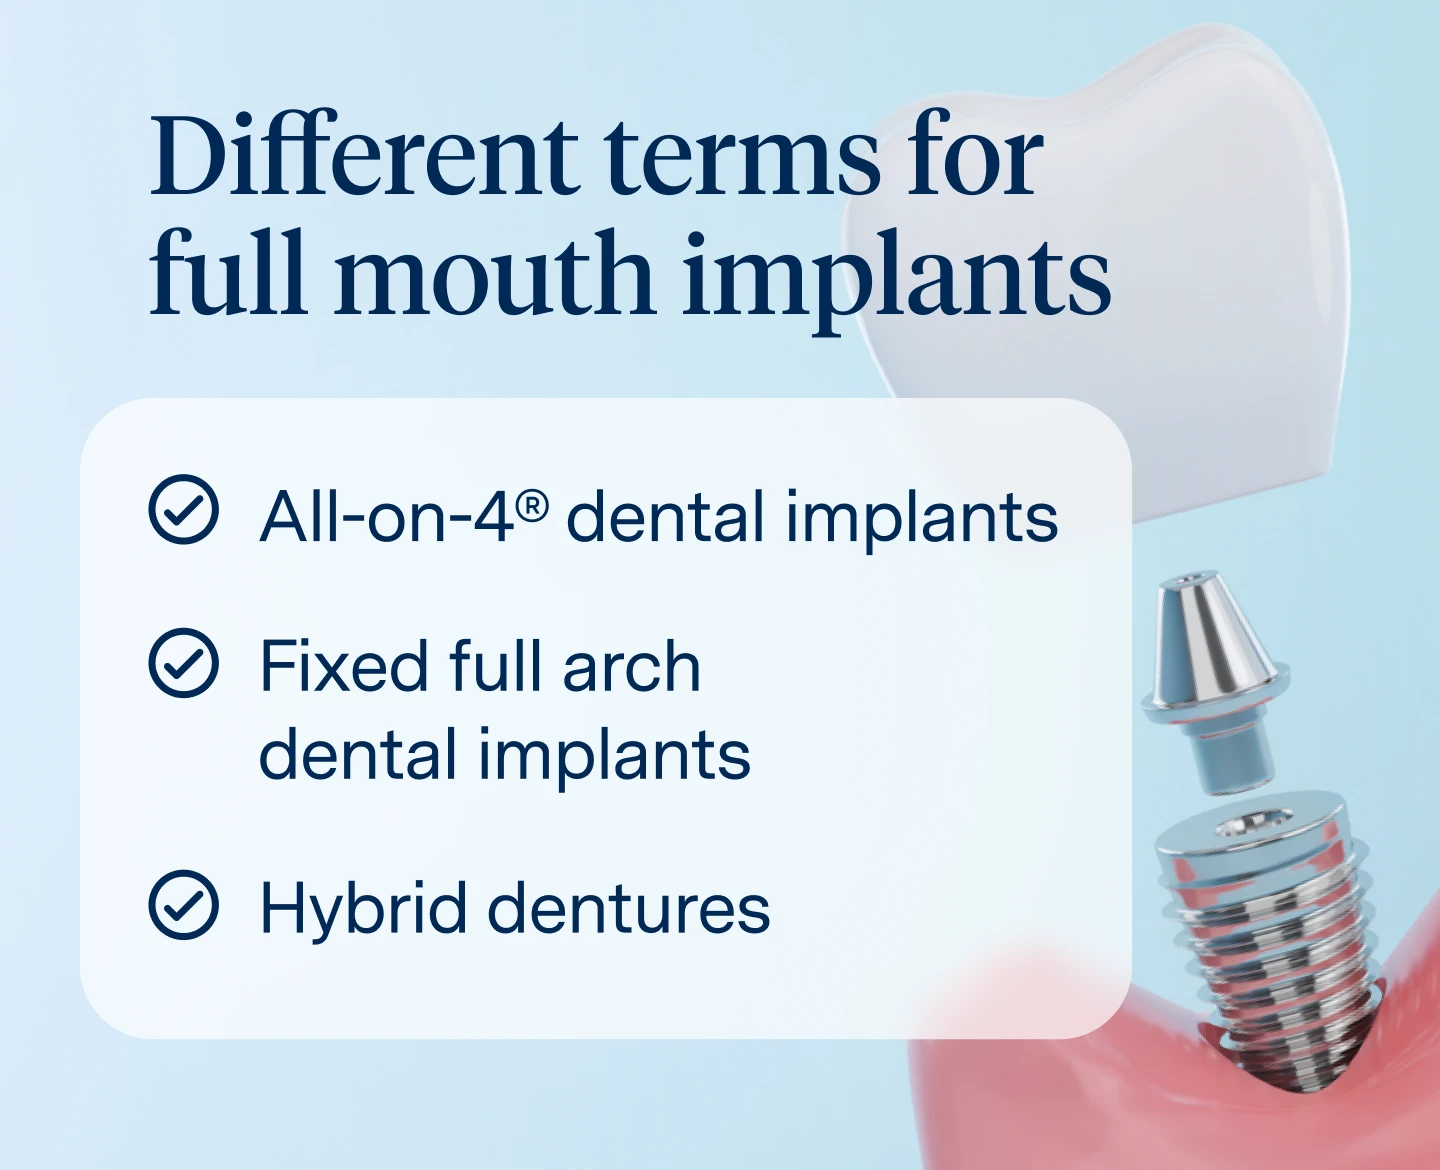 Different terms for All on 4 and fixed full arch dental implants